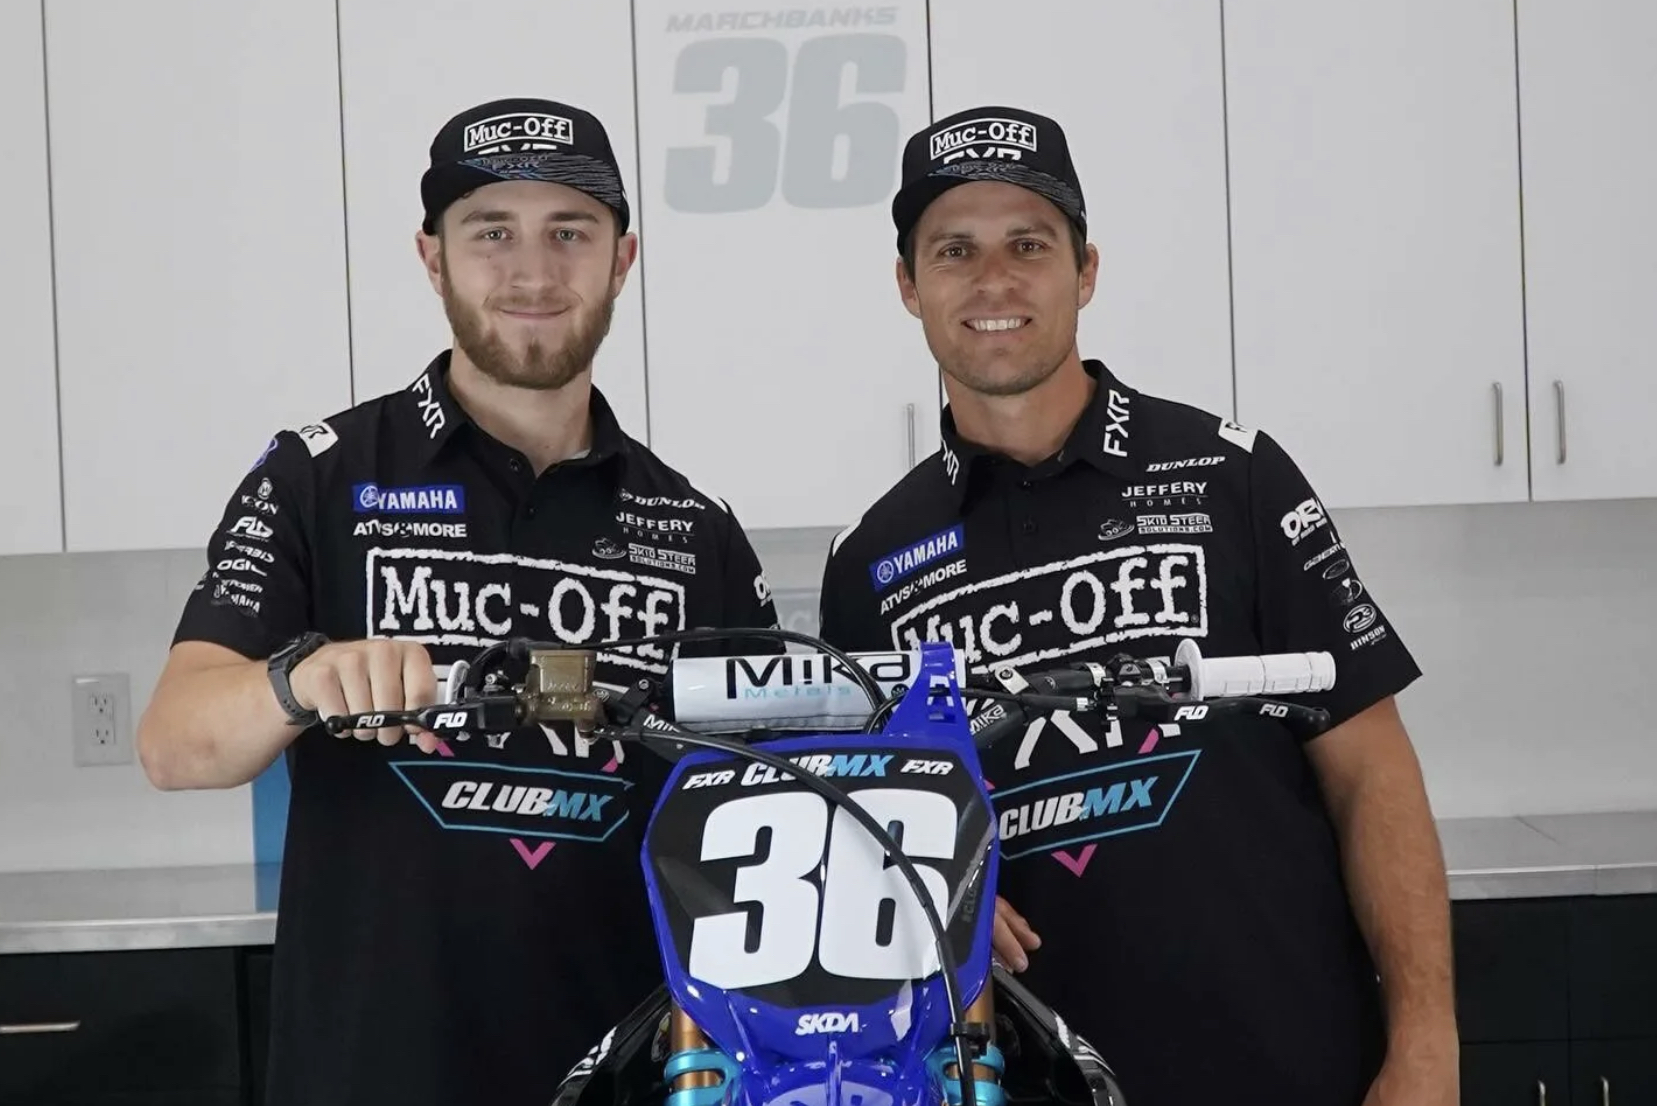 MARCHBANKS EXTENDS WITH CLUBMX FOR TWO YEAR